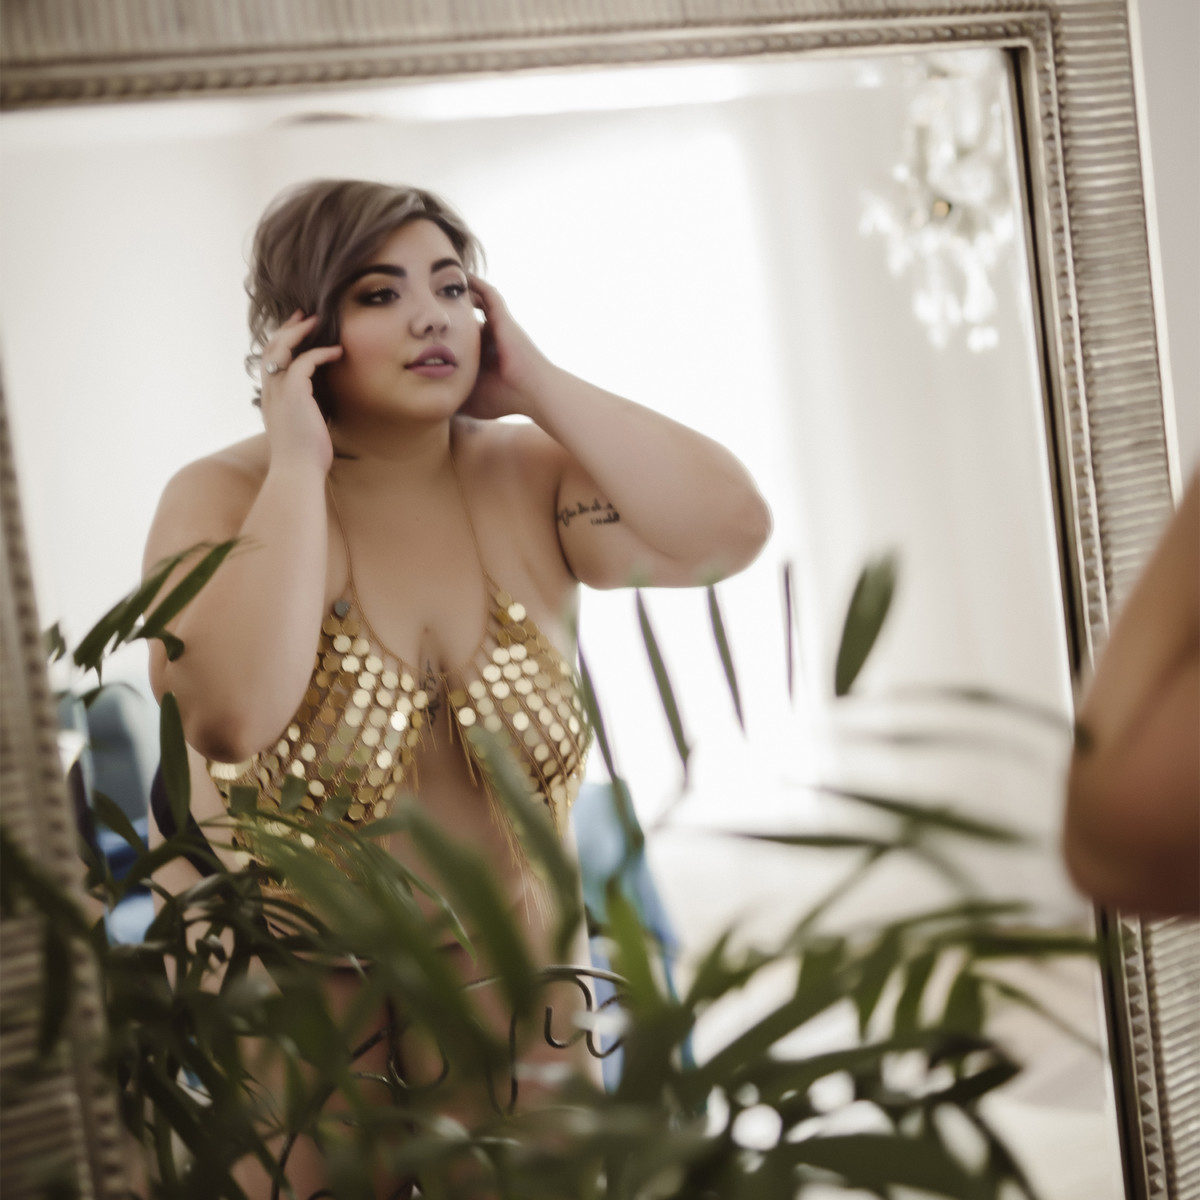 Brisbane Boudoir Photography client posing in front of a mirror wearing gold sequin lingerie